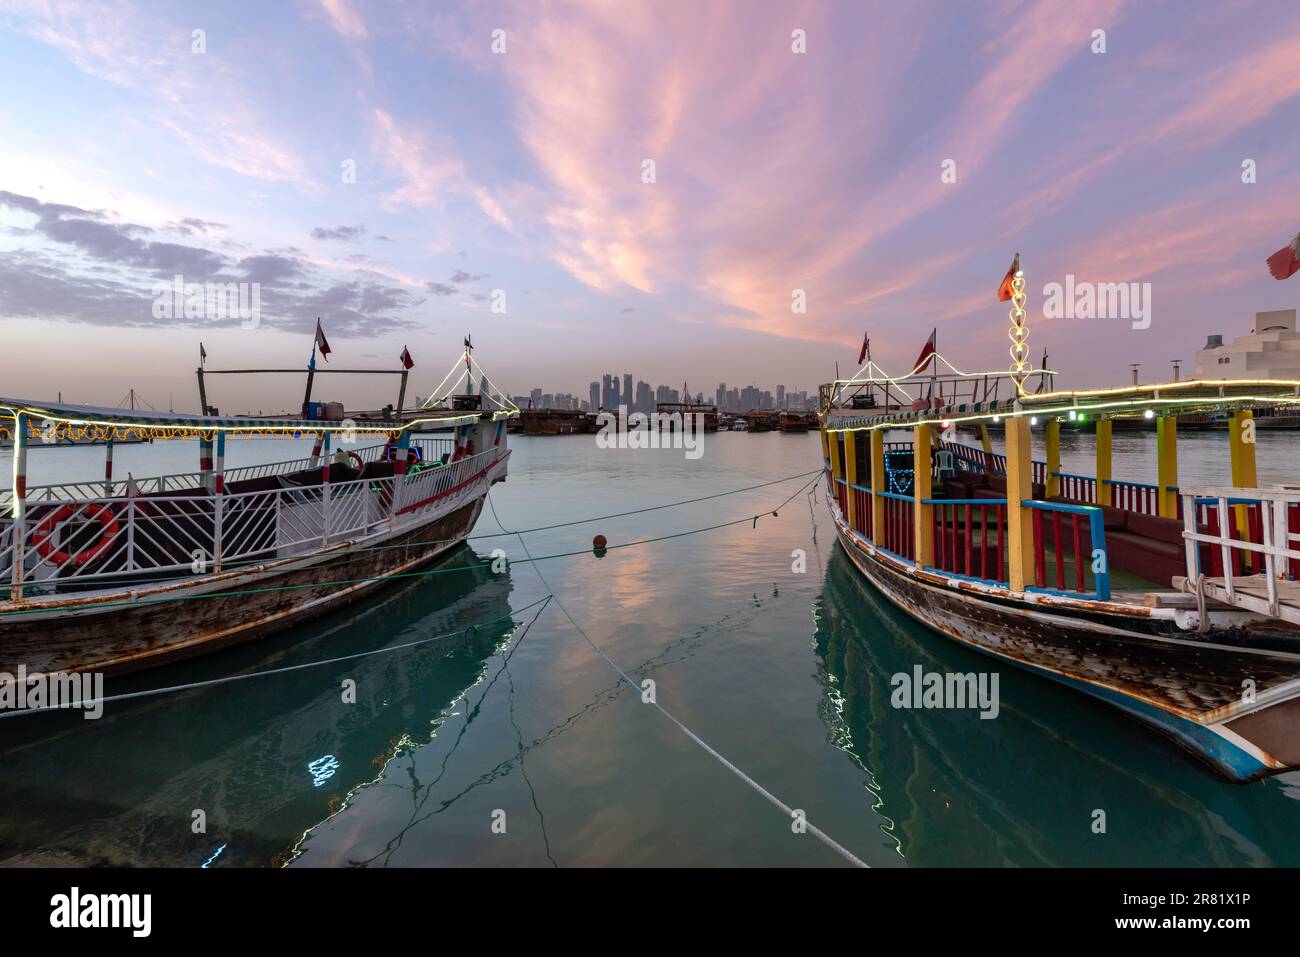 Doha passenger boats moored for serving people of Qatar Stock Photo